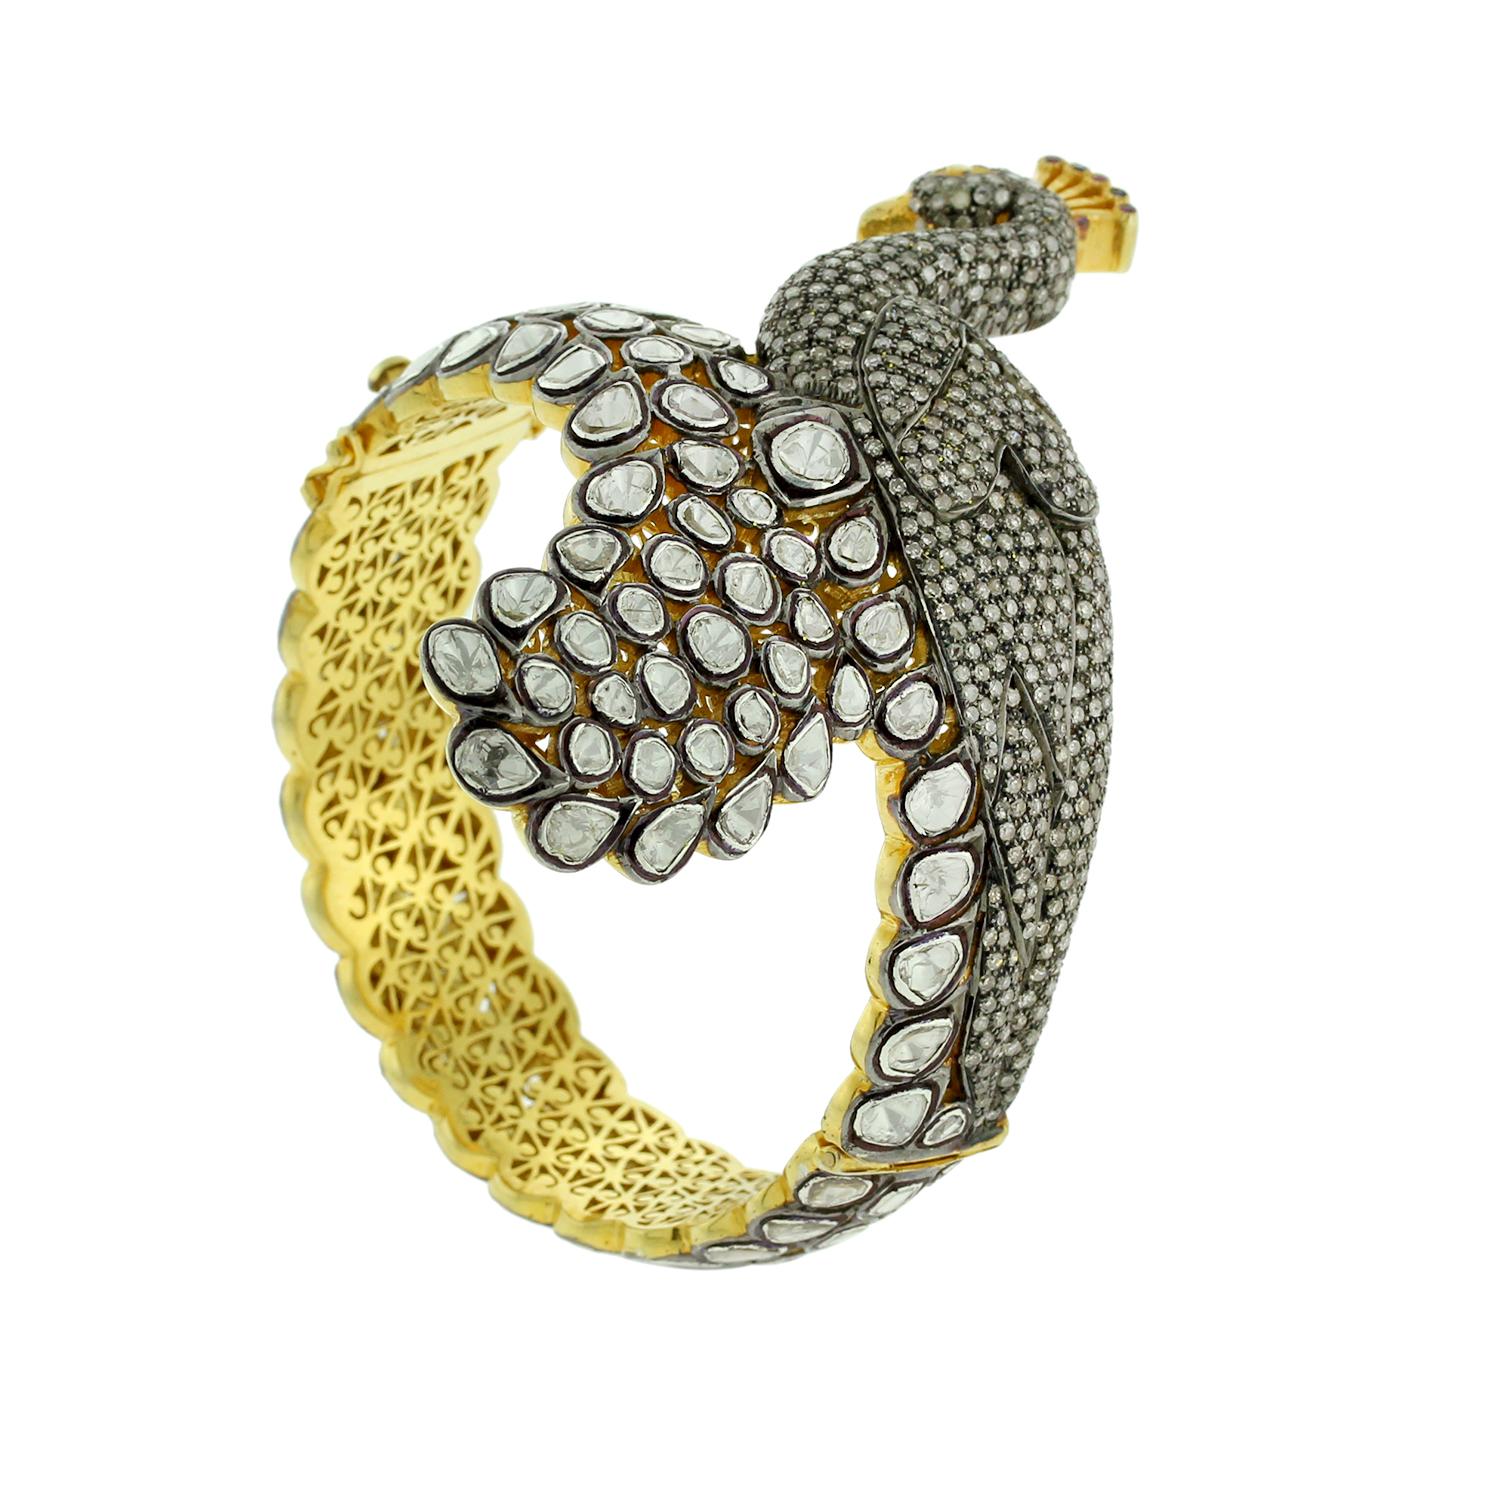 Pretty Peacock bangle in Silver and Gold with rosecut diamonds a unique blend of modern and traditional look. This bangle can be opened on side and very beautifully handcrafted. 

14KT: 19.04gms
Diamond: 13ct
SiIver: 60.97g
RUBY: 0.43ct 
